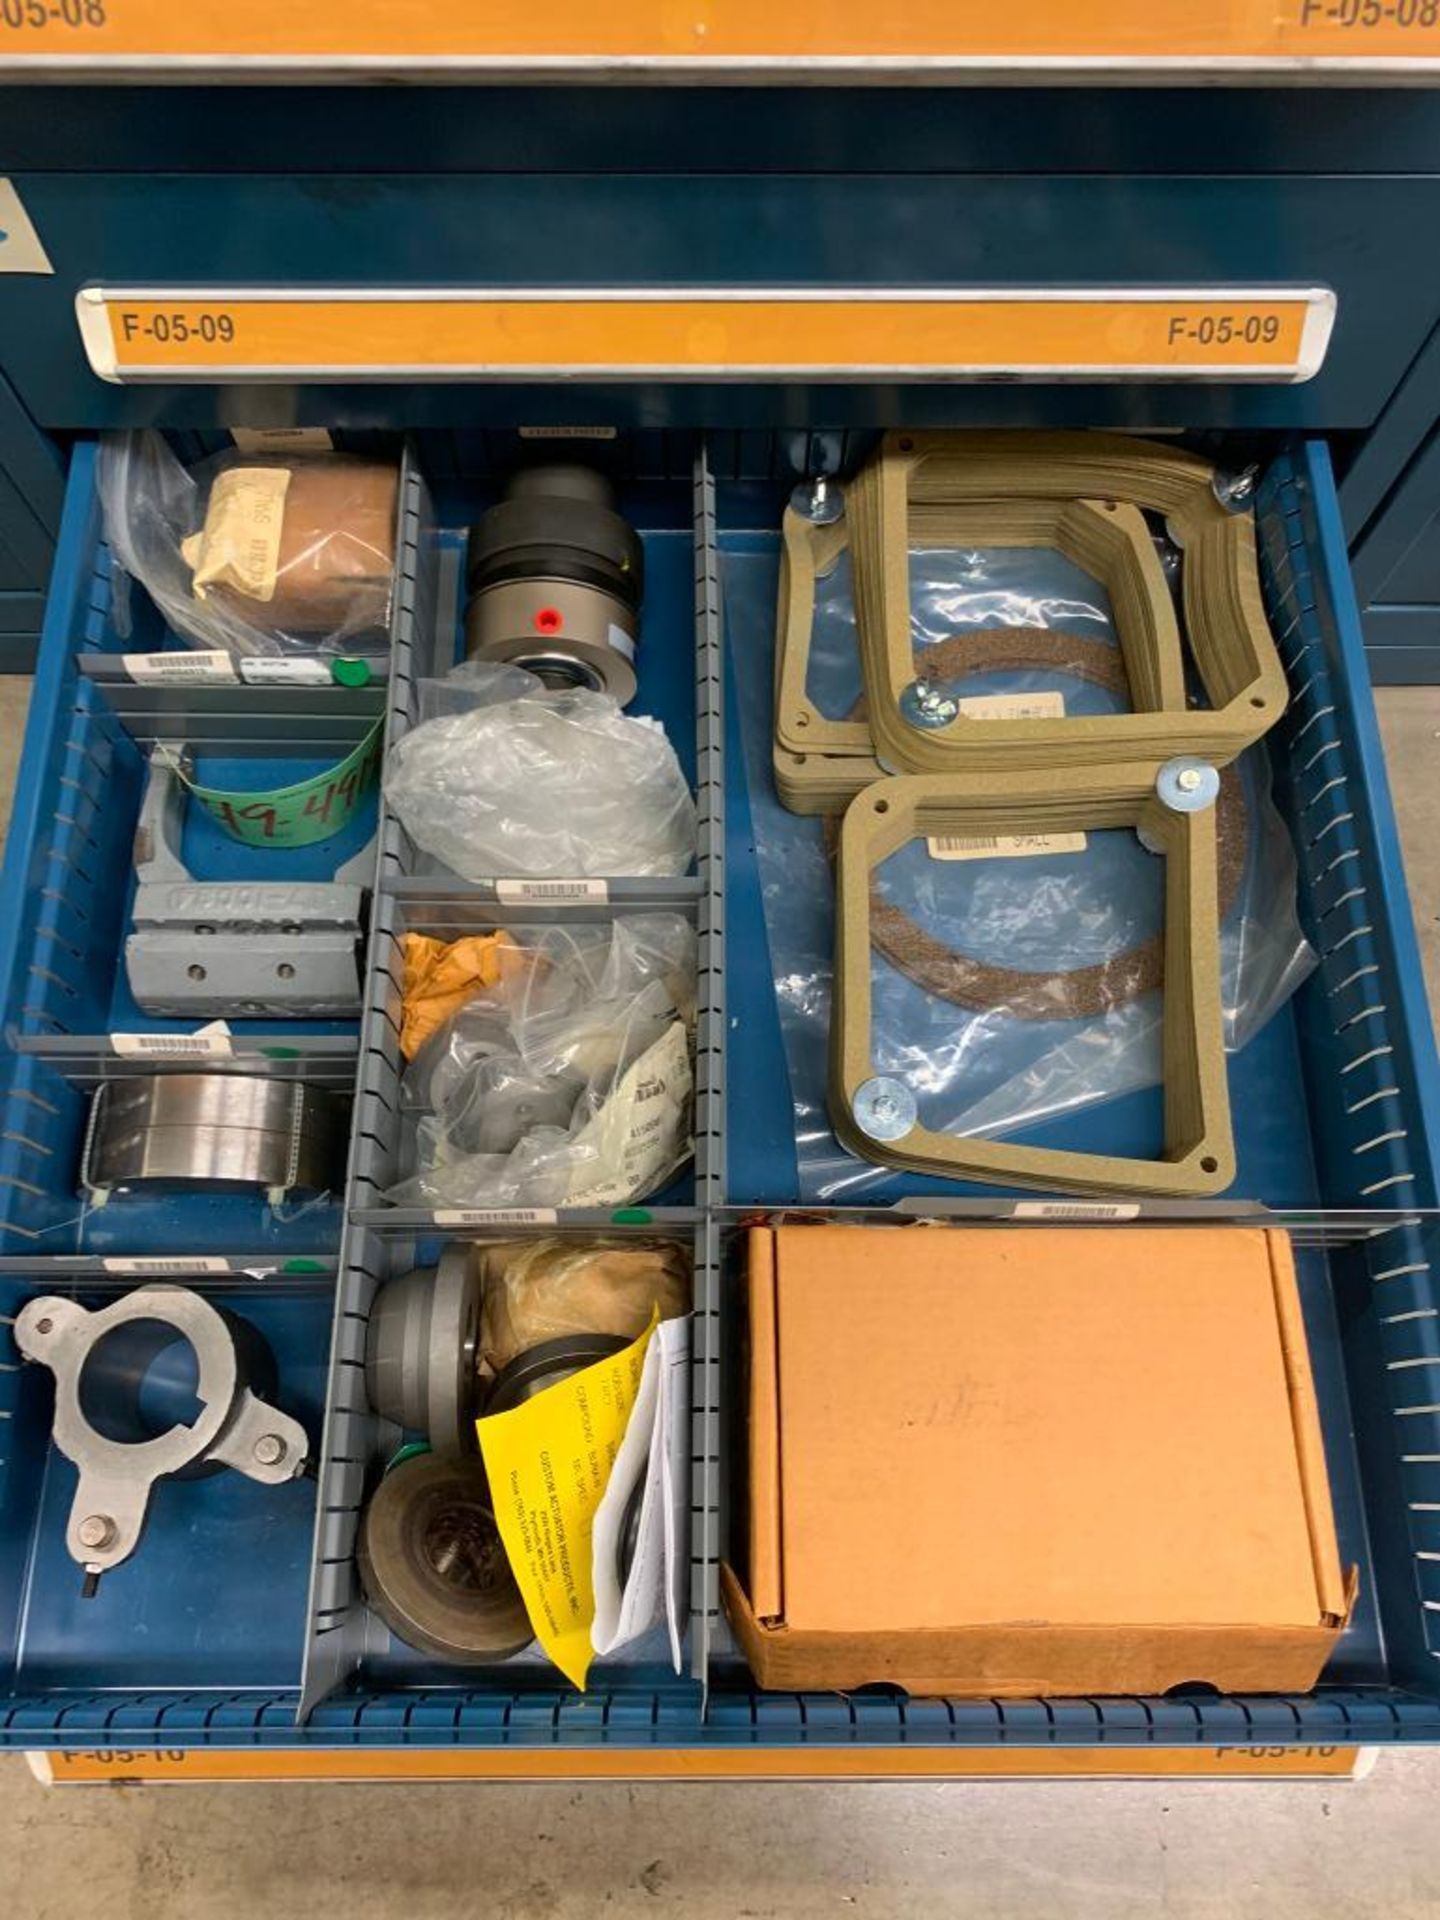 Vidmar 10-Drawer Cabinet w/ Collars, Oil Seals, Seal Kits, Gaskets, Assorted Cams - Image 12 of 13